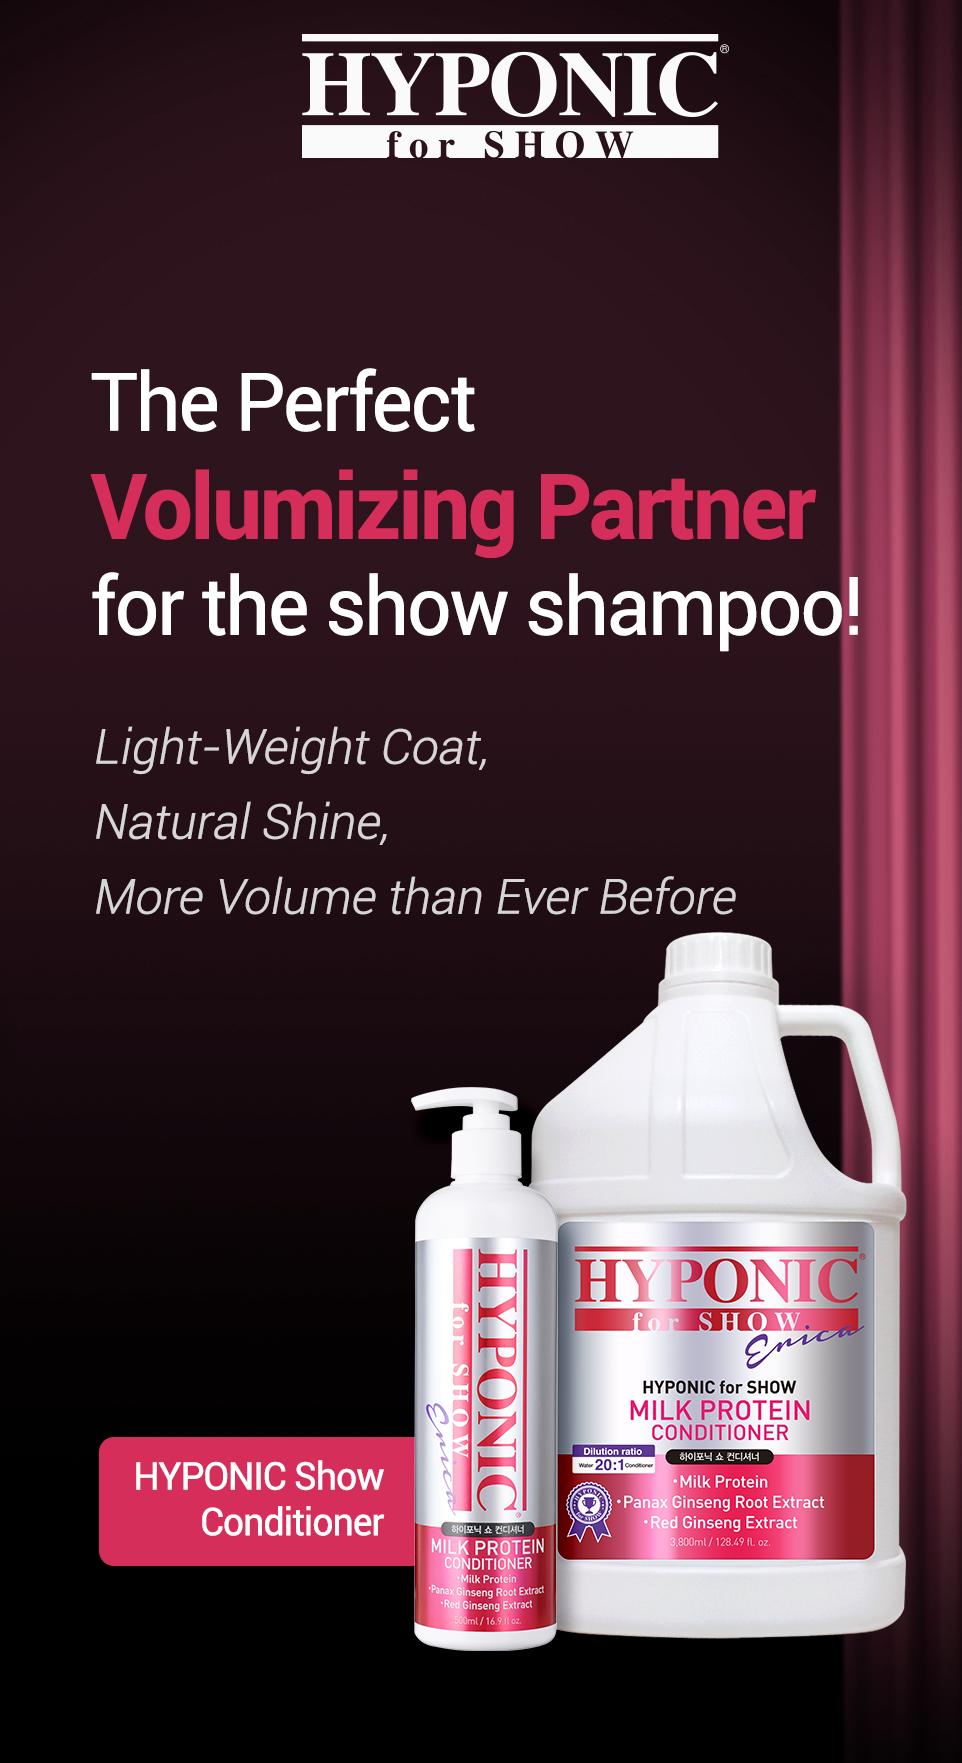 HYPONIC for SHOW - Milk Protein Conditioner